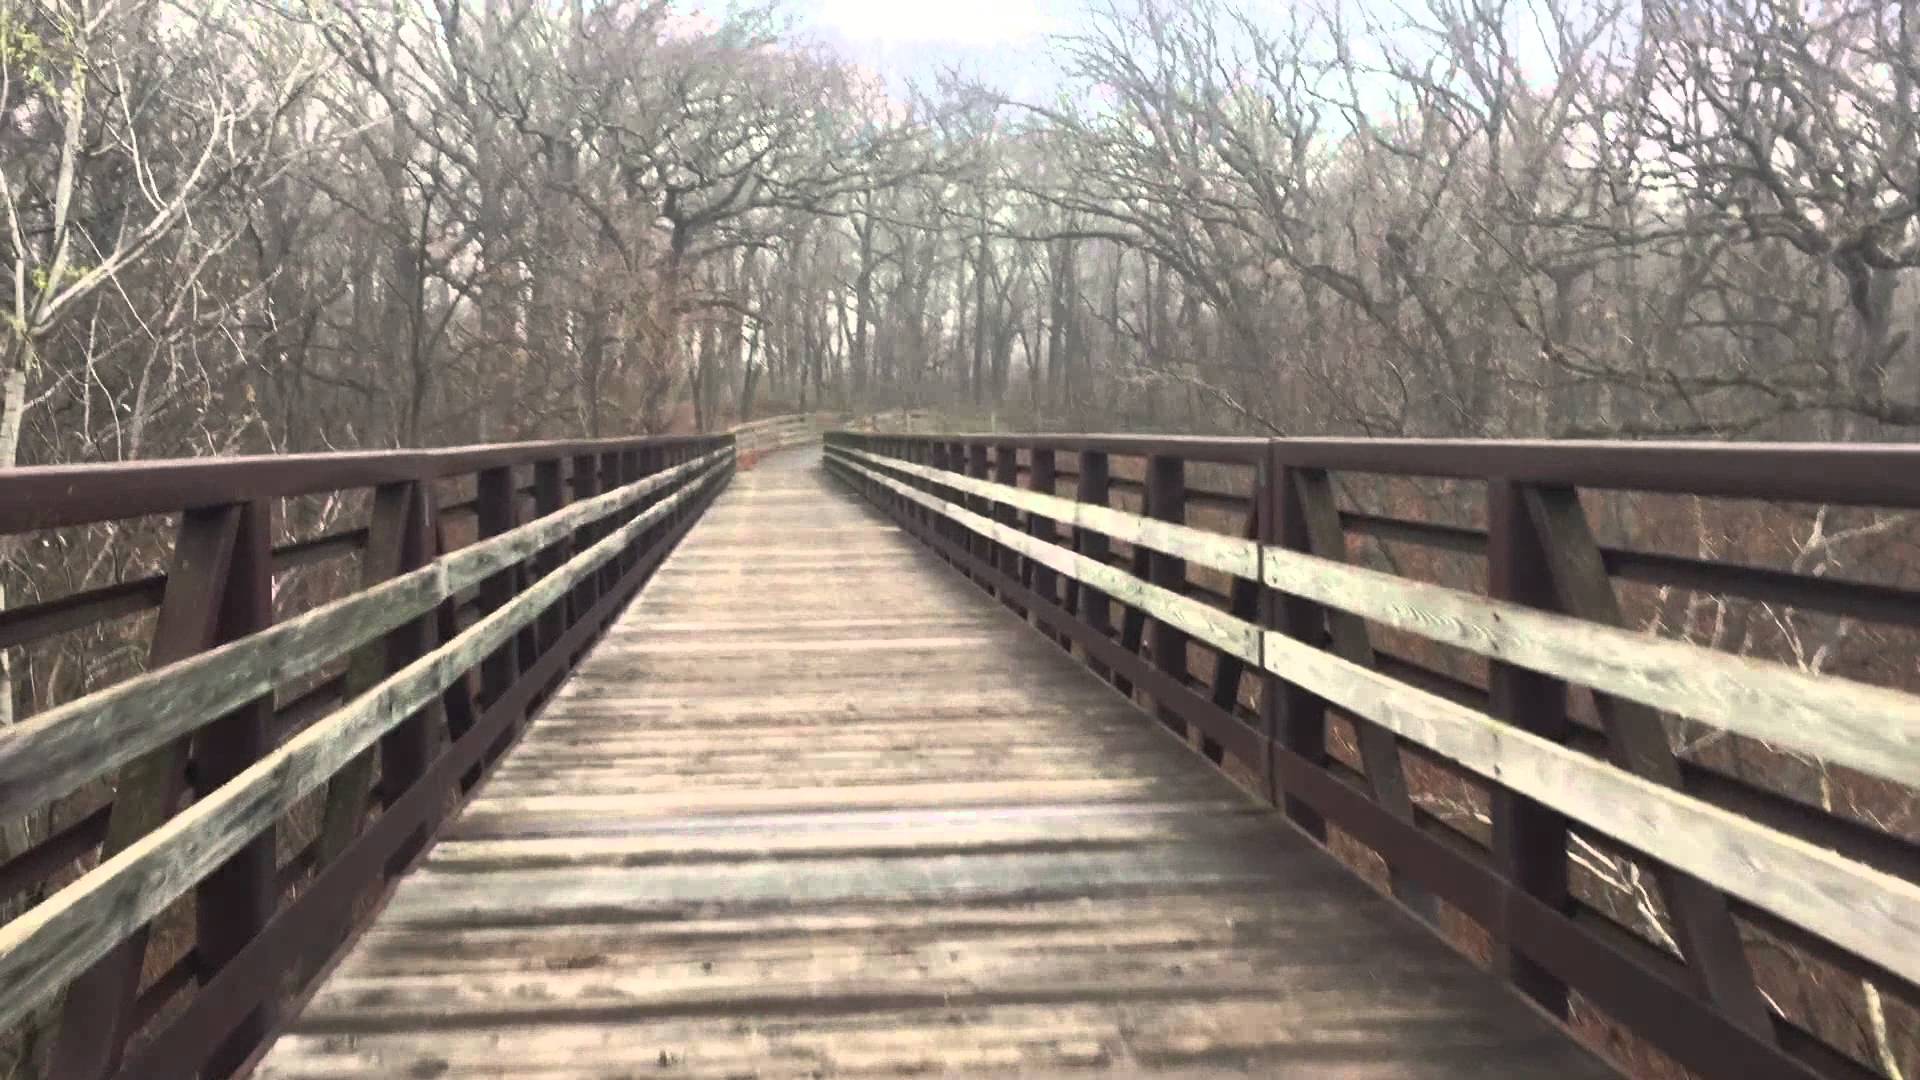 Walking on a wooden bridge in the Forest - YouTube